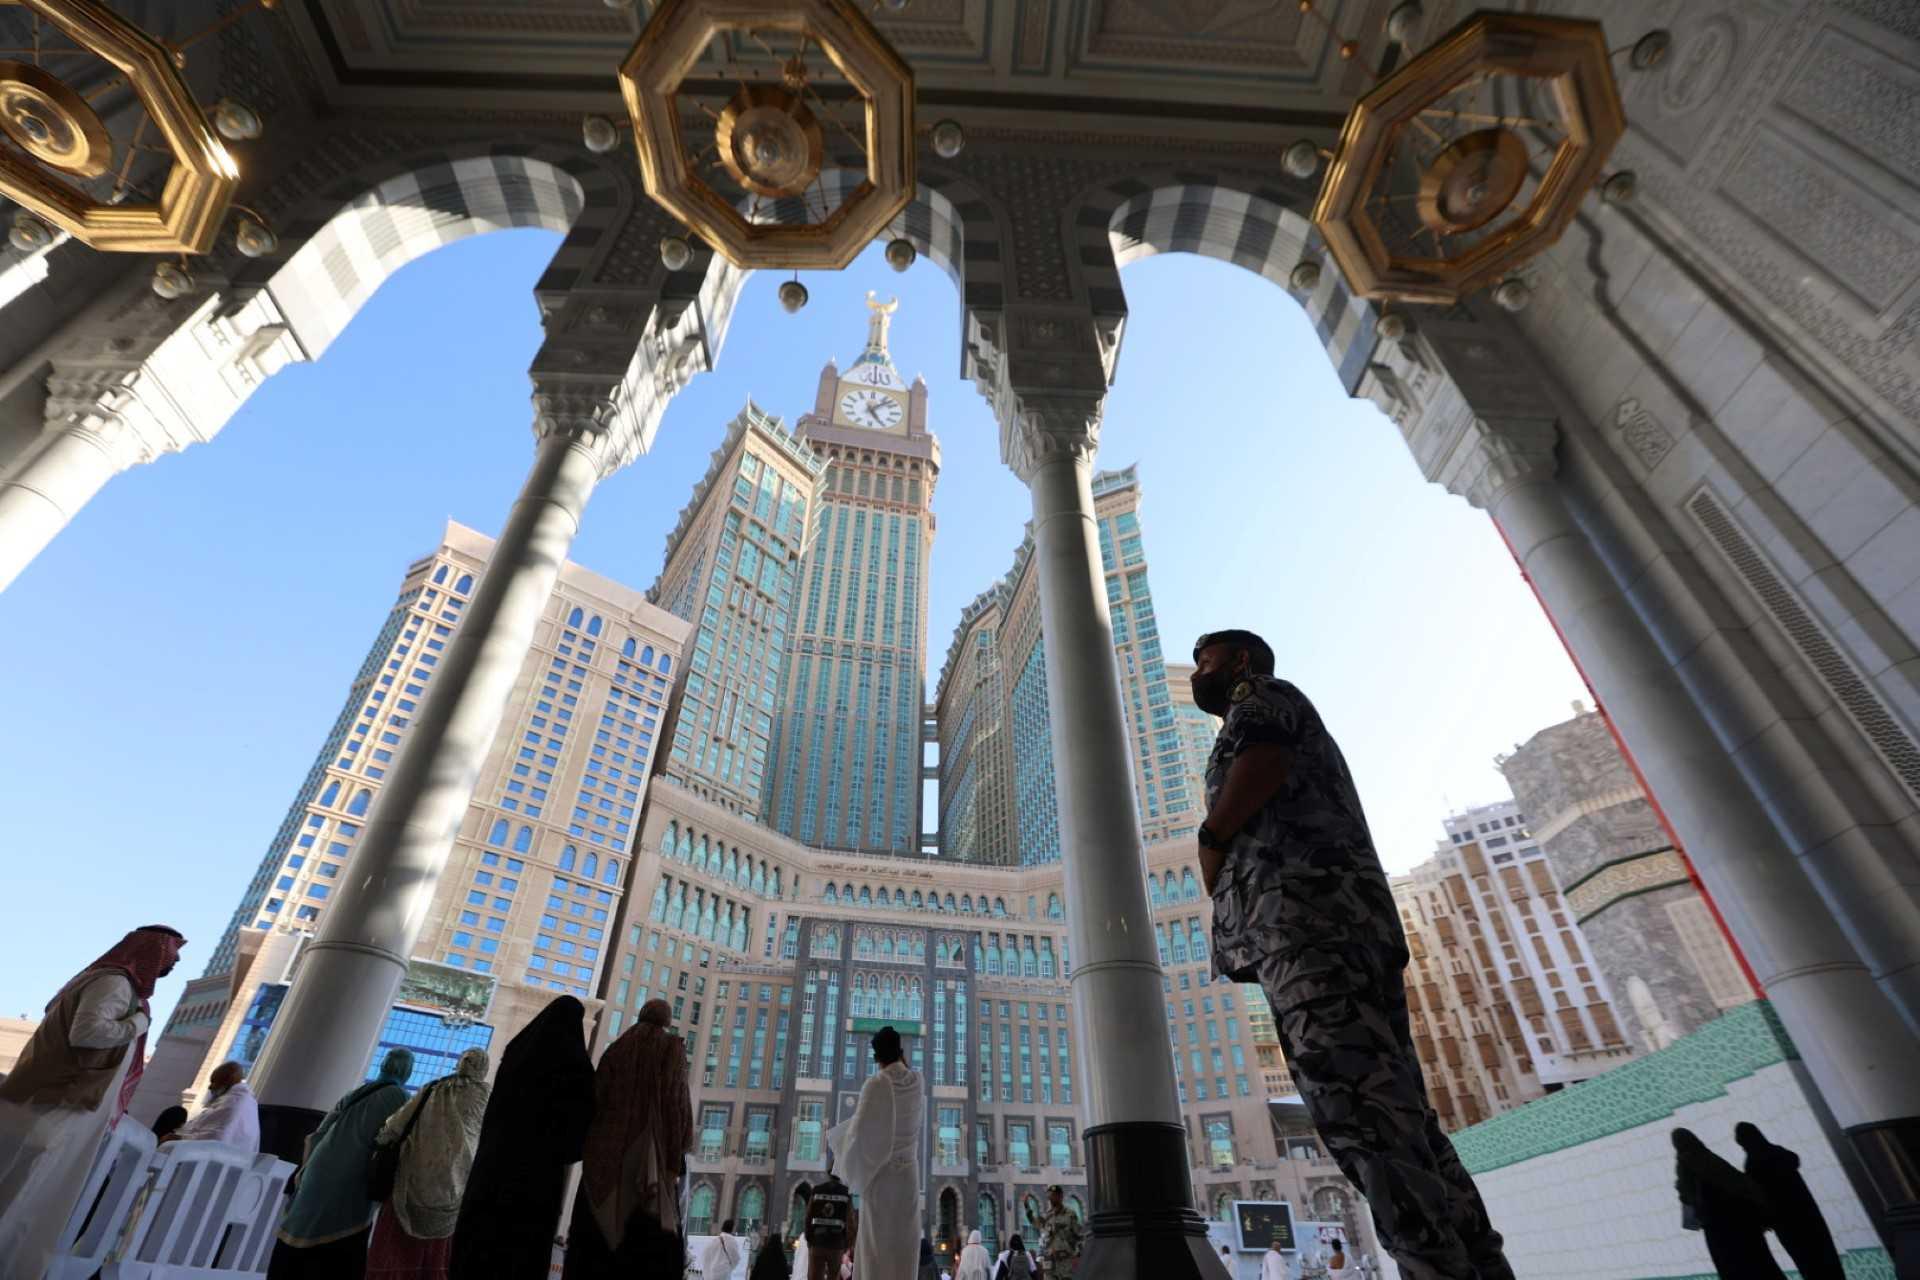 Mecca's Clock Tower is seen in the background as a member of the Saudi security forces stands guard while worshippers pray at the Grand Mosque in the holy city on March 21. Photo: AFP